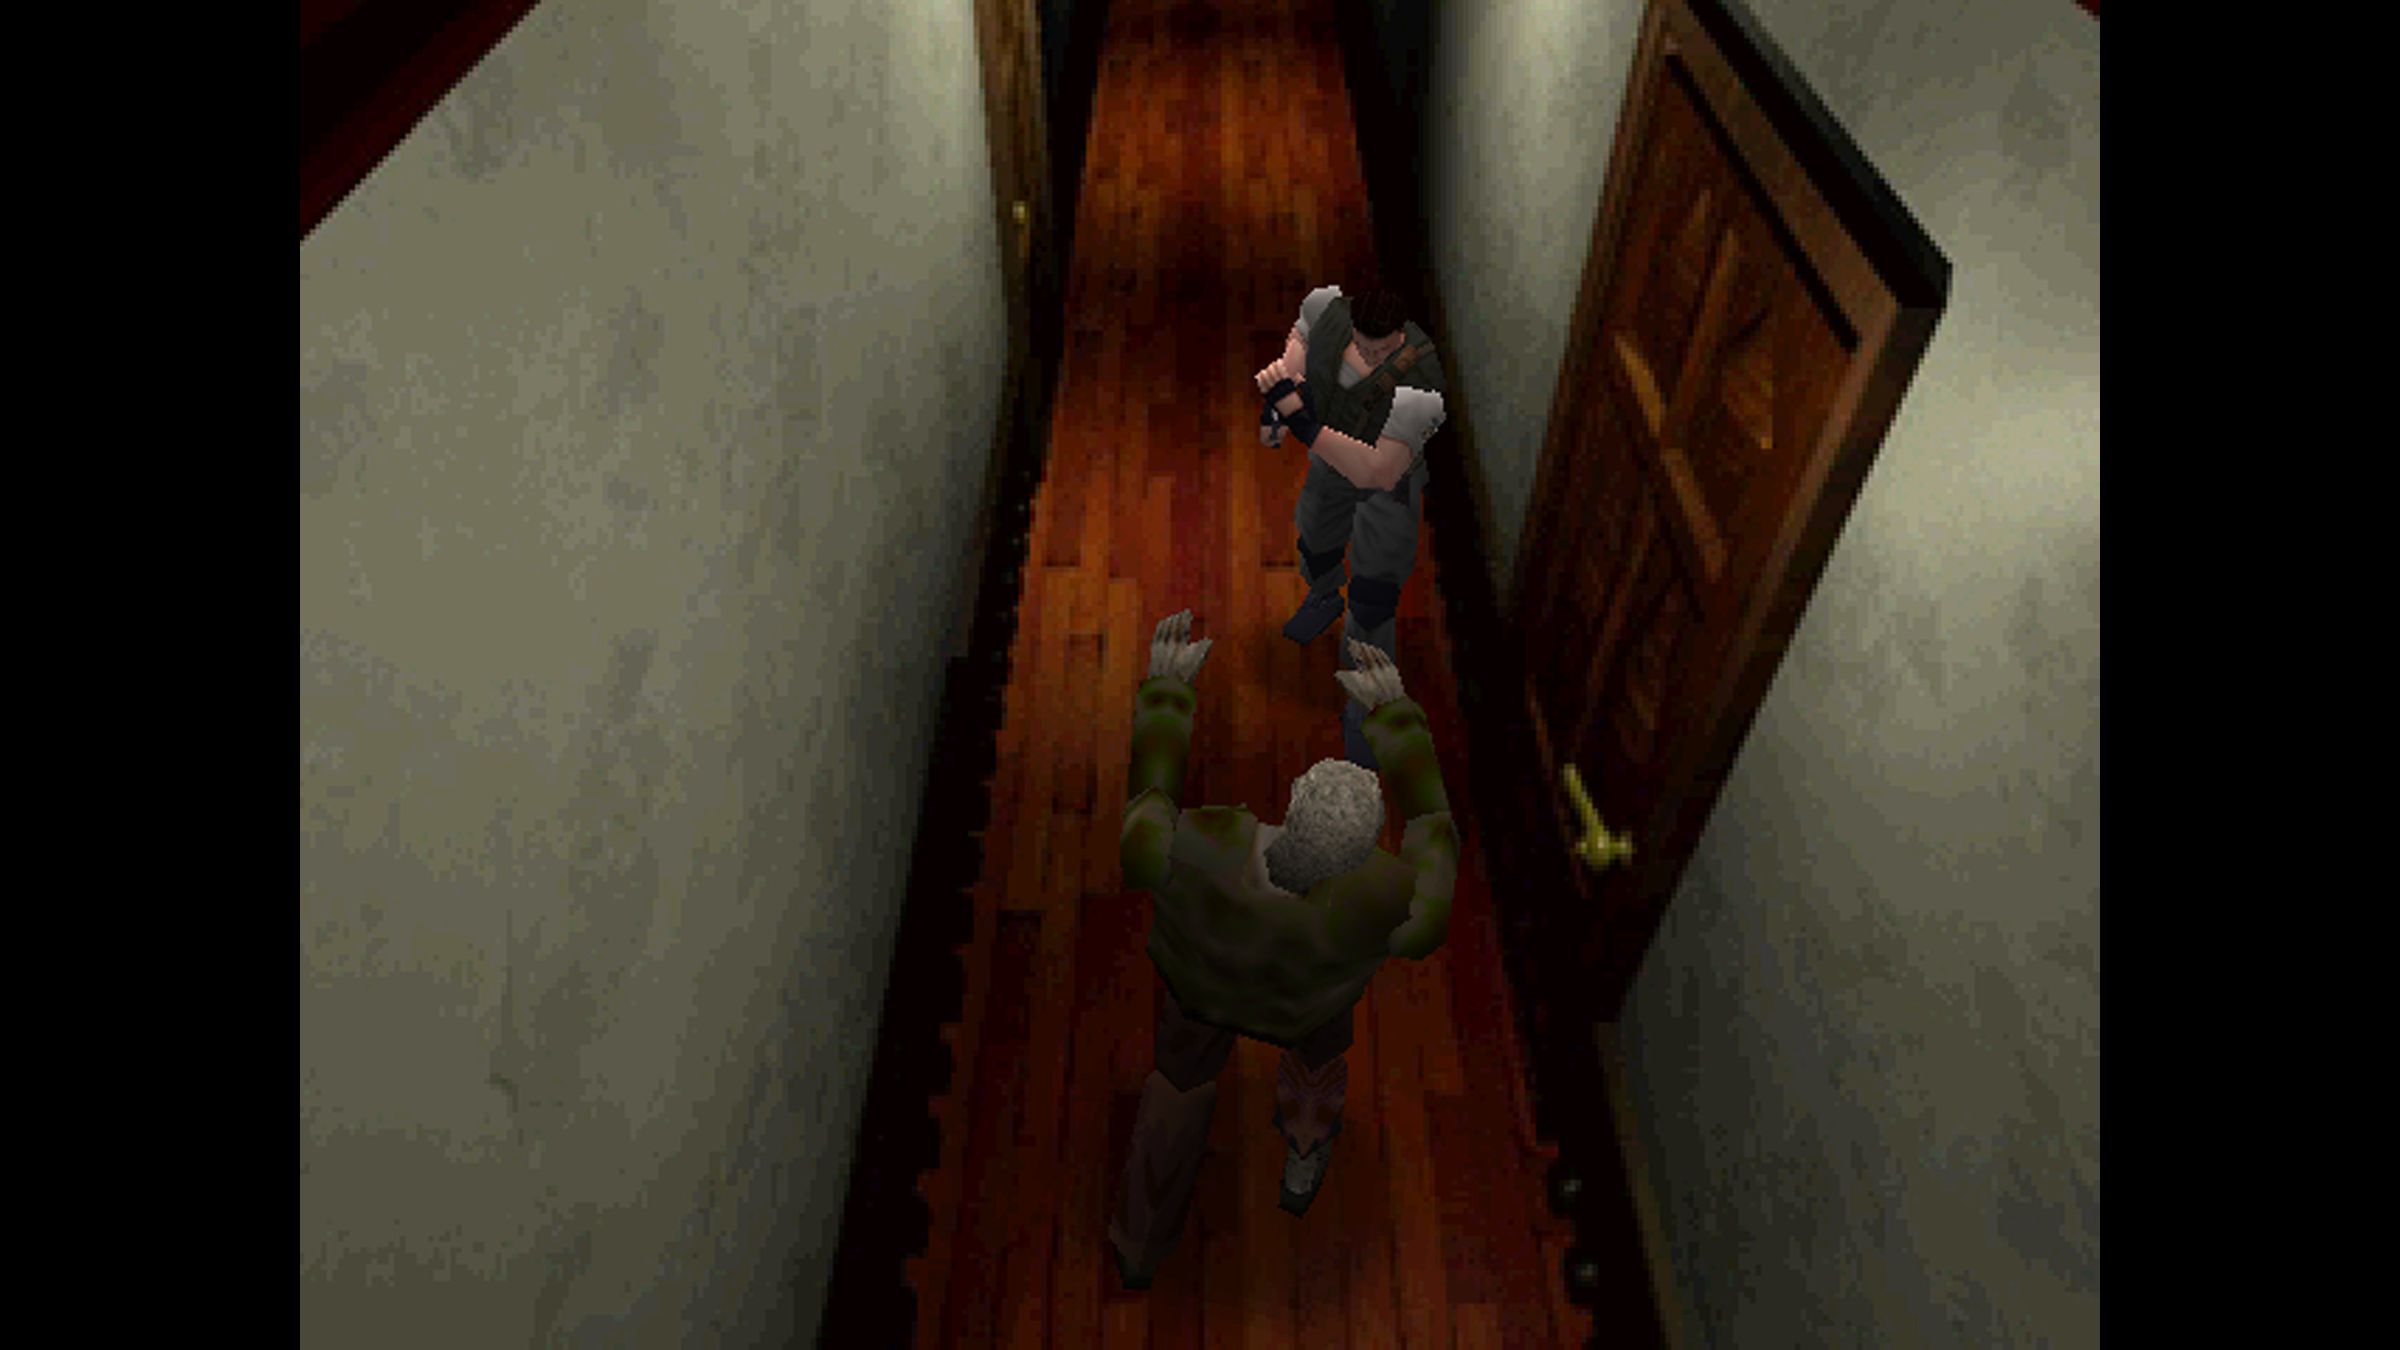 A screenshot from the original Resident Evil game.